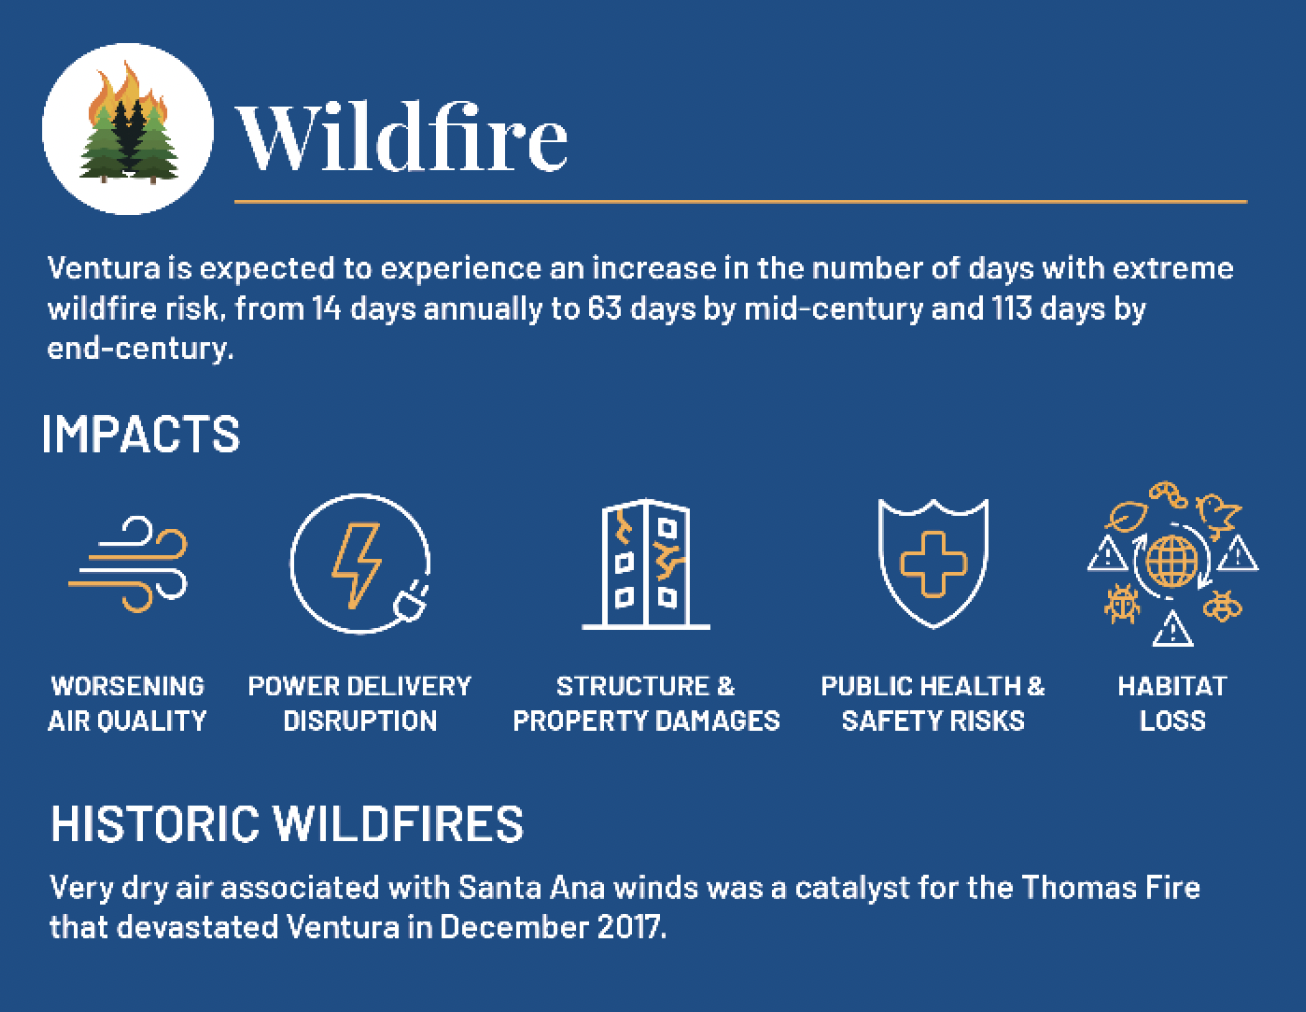 Diagrams of the city's vulnerability to wildfire impacts. The City of Ventura projects an increase in the number of days with extreme wildfire risk from 14 days annually to 63 days by mid-century and 113 days by end century. 